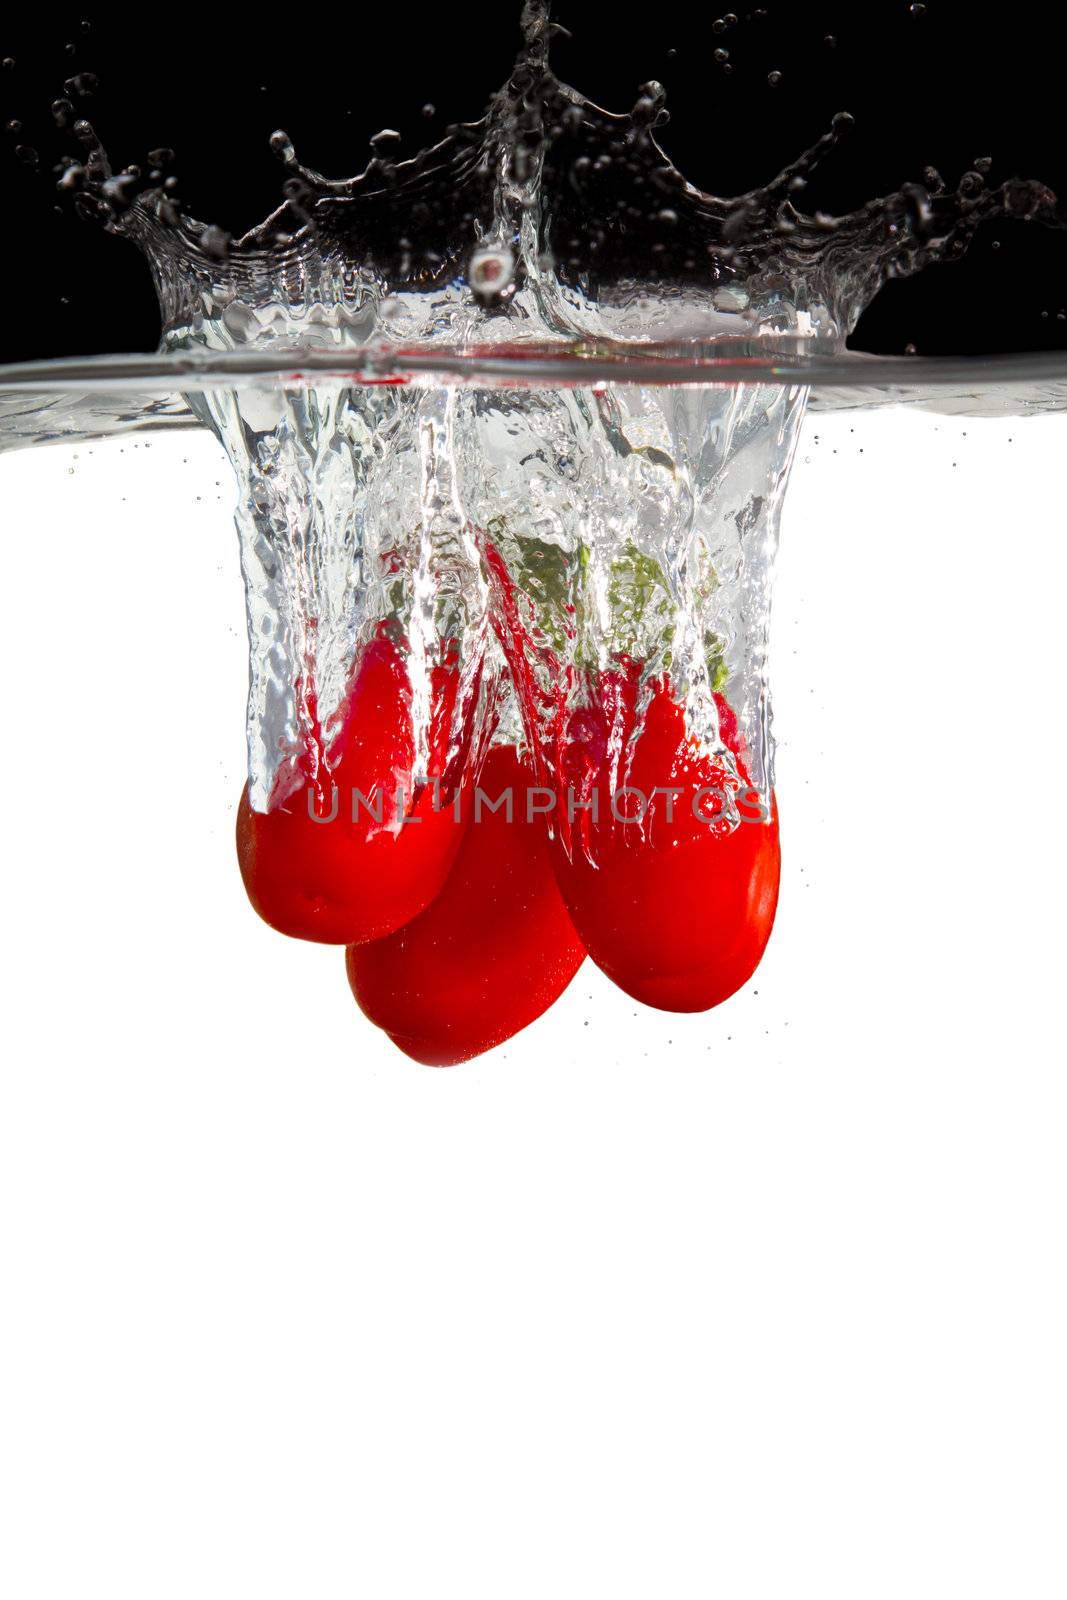 some red tomatos thrown in water with black and white background